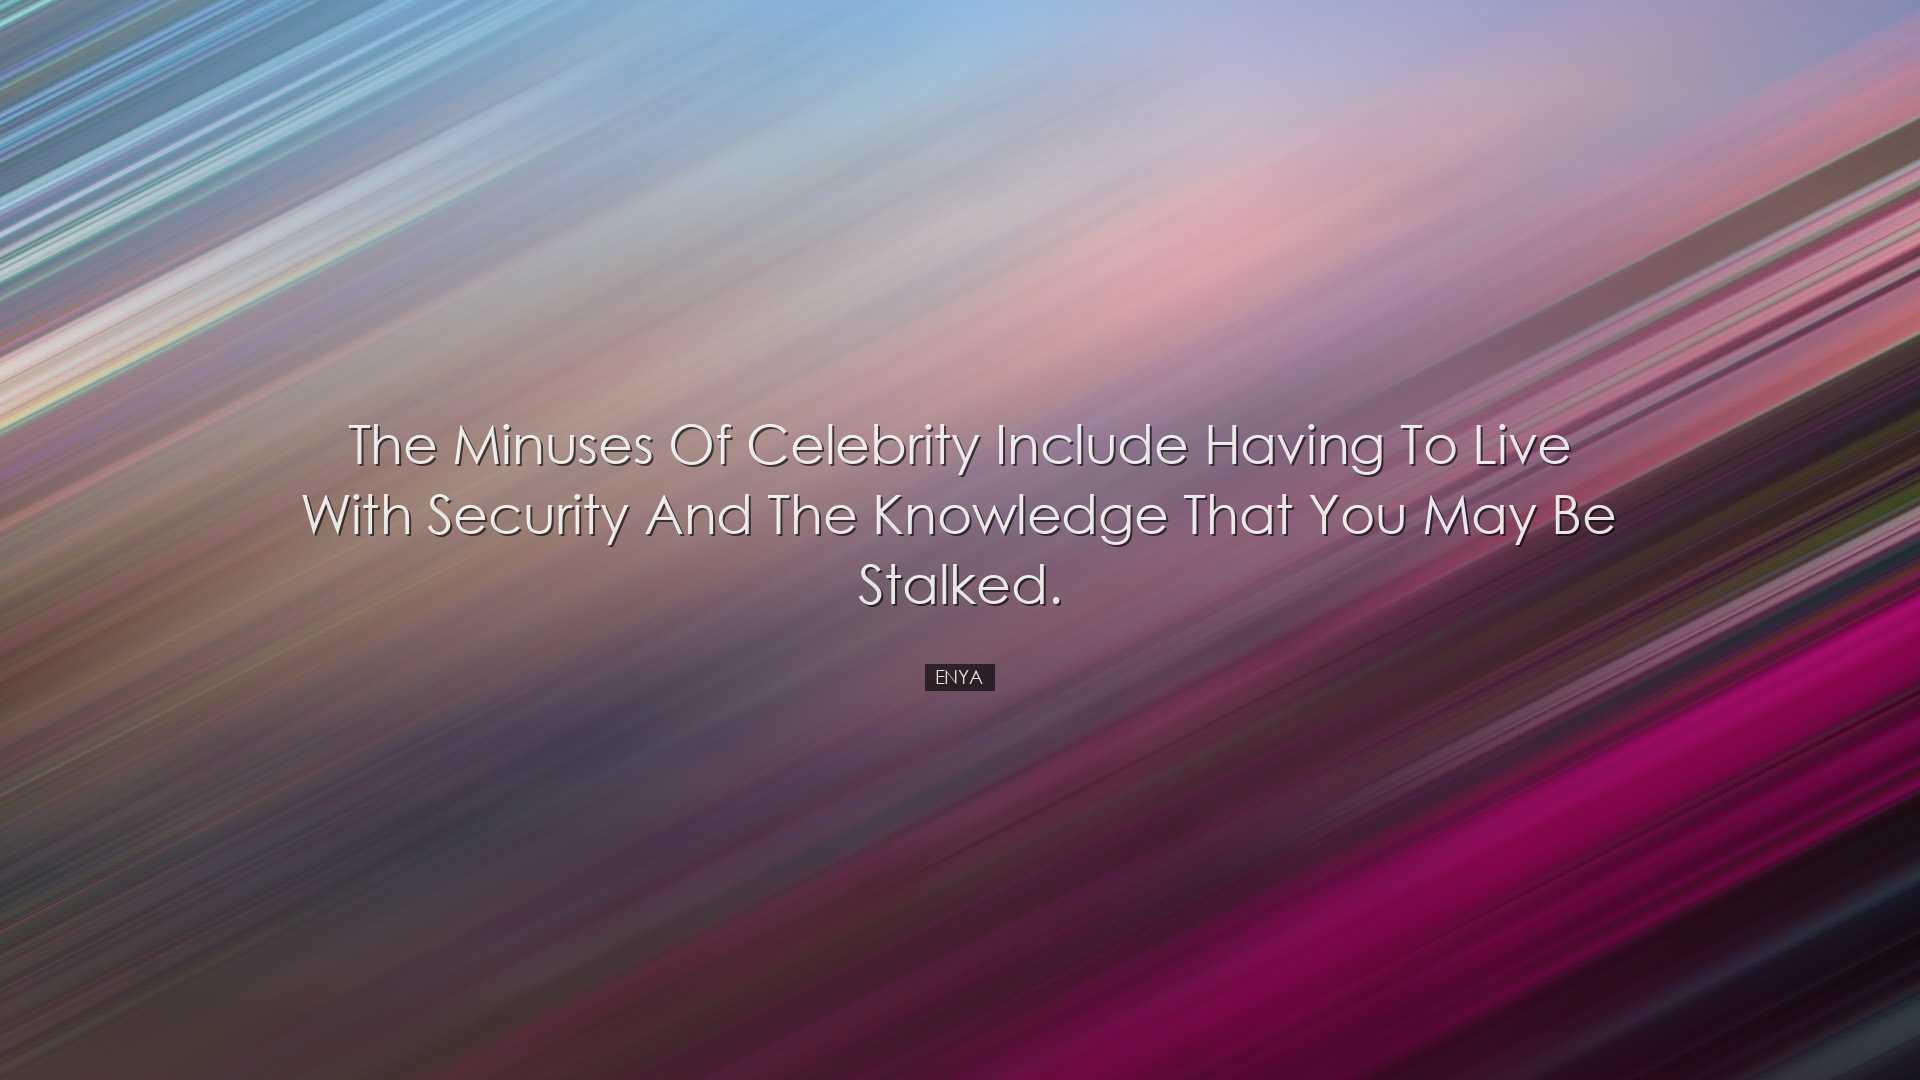 The minuses of celebrity include having to live with security and